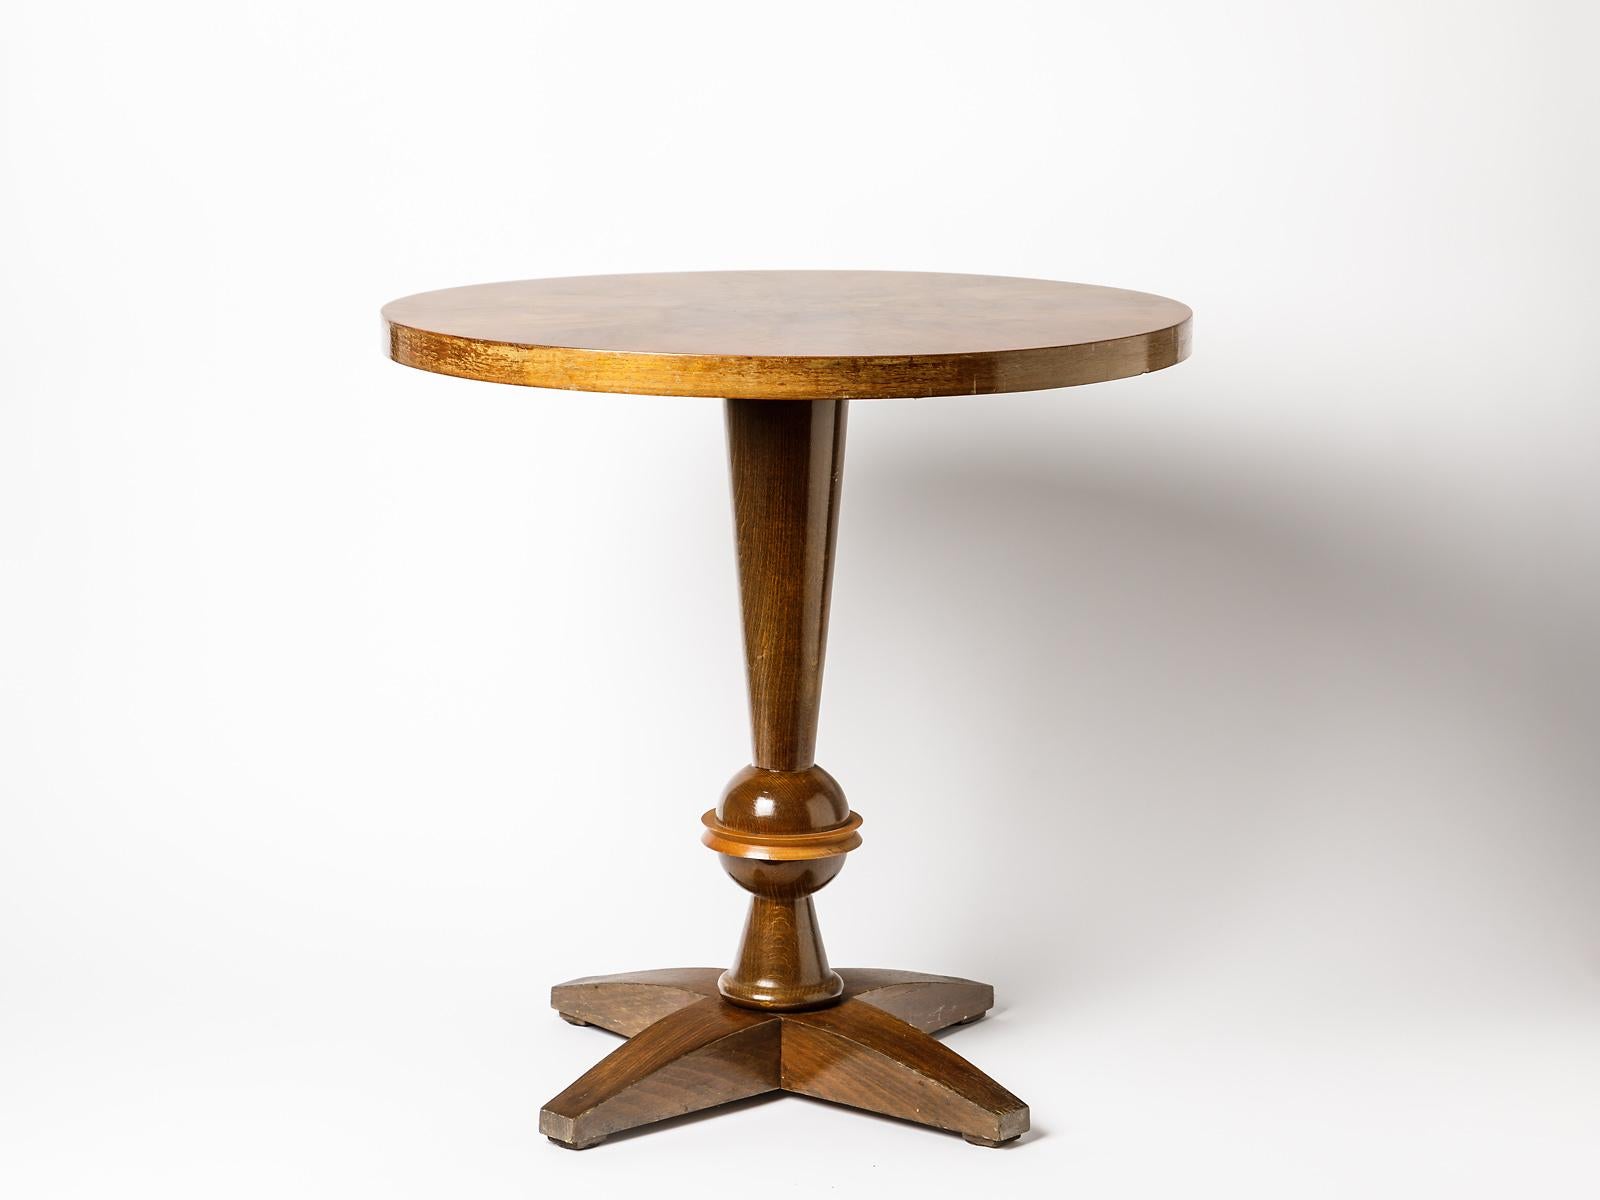 French Art Deco period table

Elegant brown wooden pedestal table realized, circa 1930-1940

In the style of Jean Royère furnitures, original mid-20th century design.

Original good conditions 

Measures: Height 54cm, large 54cm.